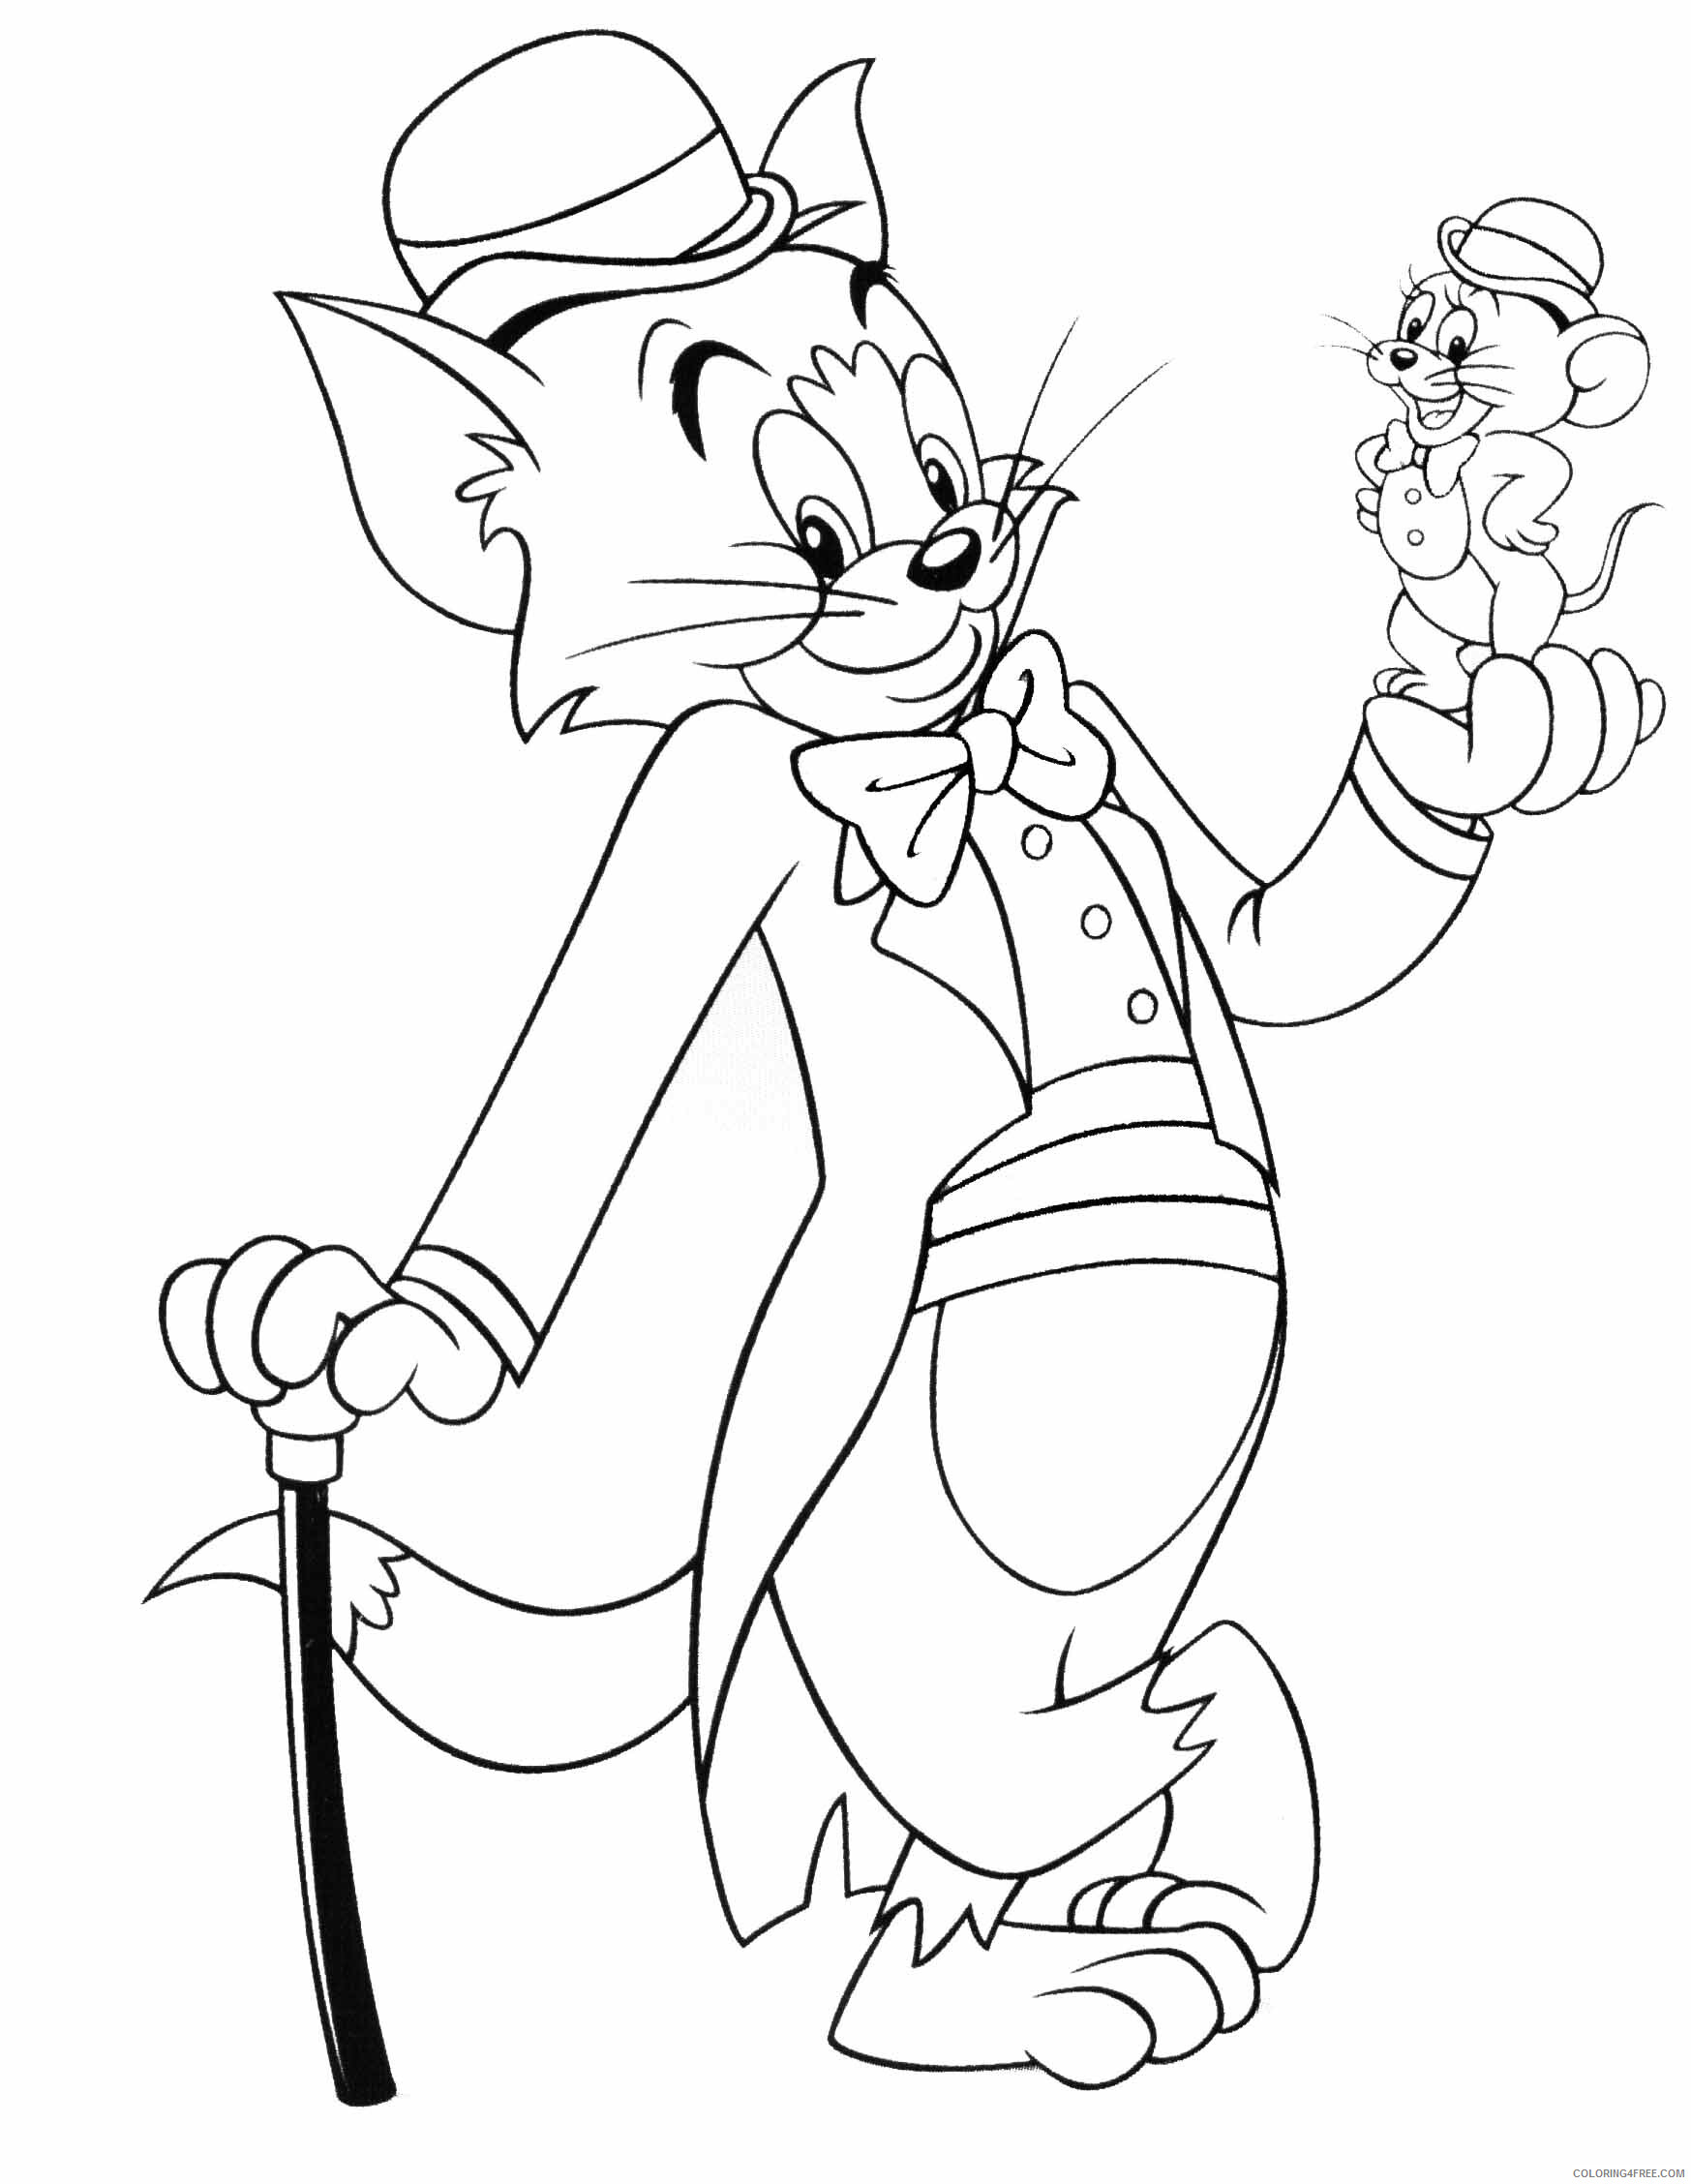 Tom and Jerry Coloring Pages TV Film Free Tom and Jerry Printable 2020 10106 Coloring4free